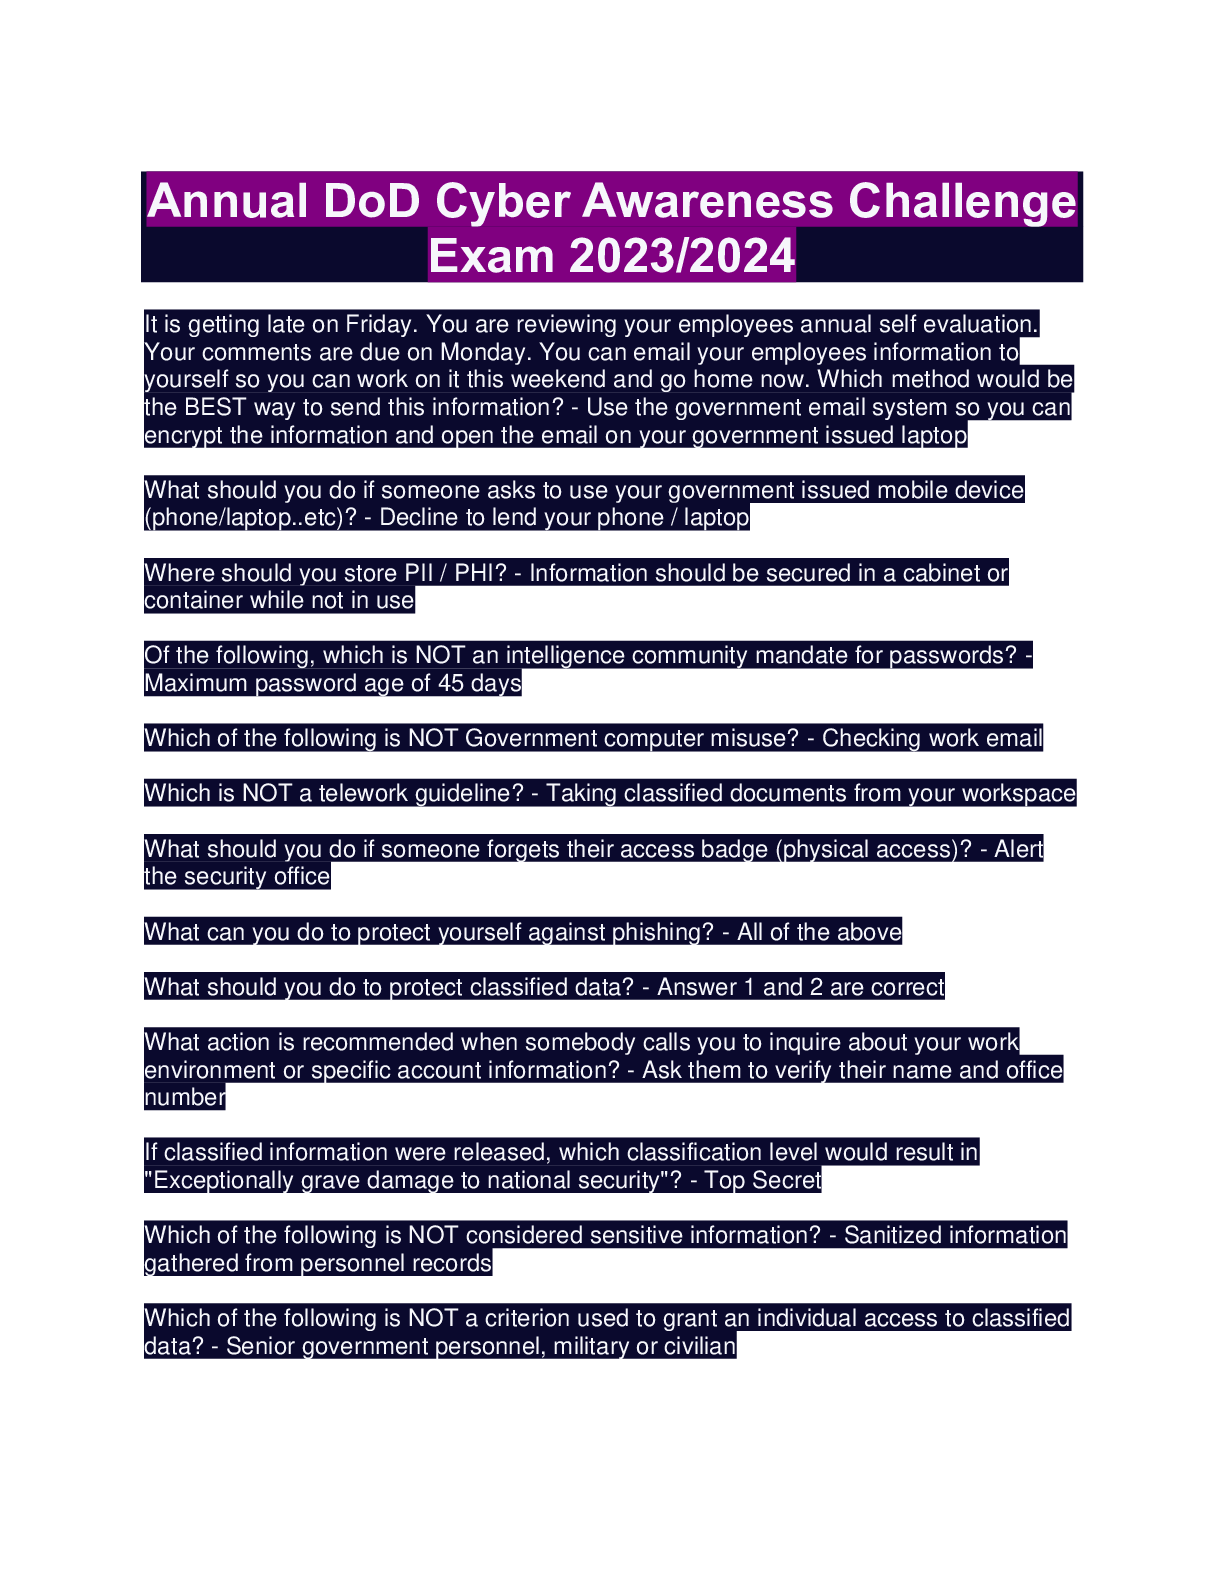 Annual DoD Cyber Awareness Challenge Exam 2023/2024 - Browsegrades